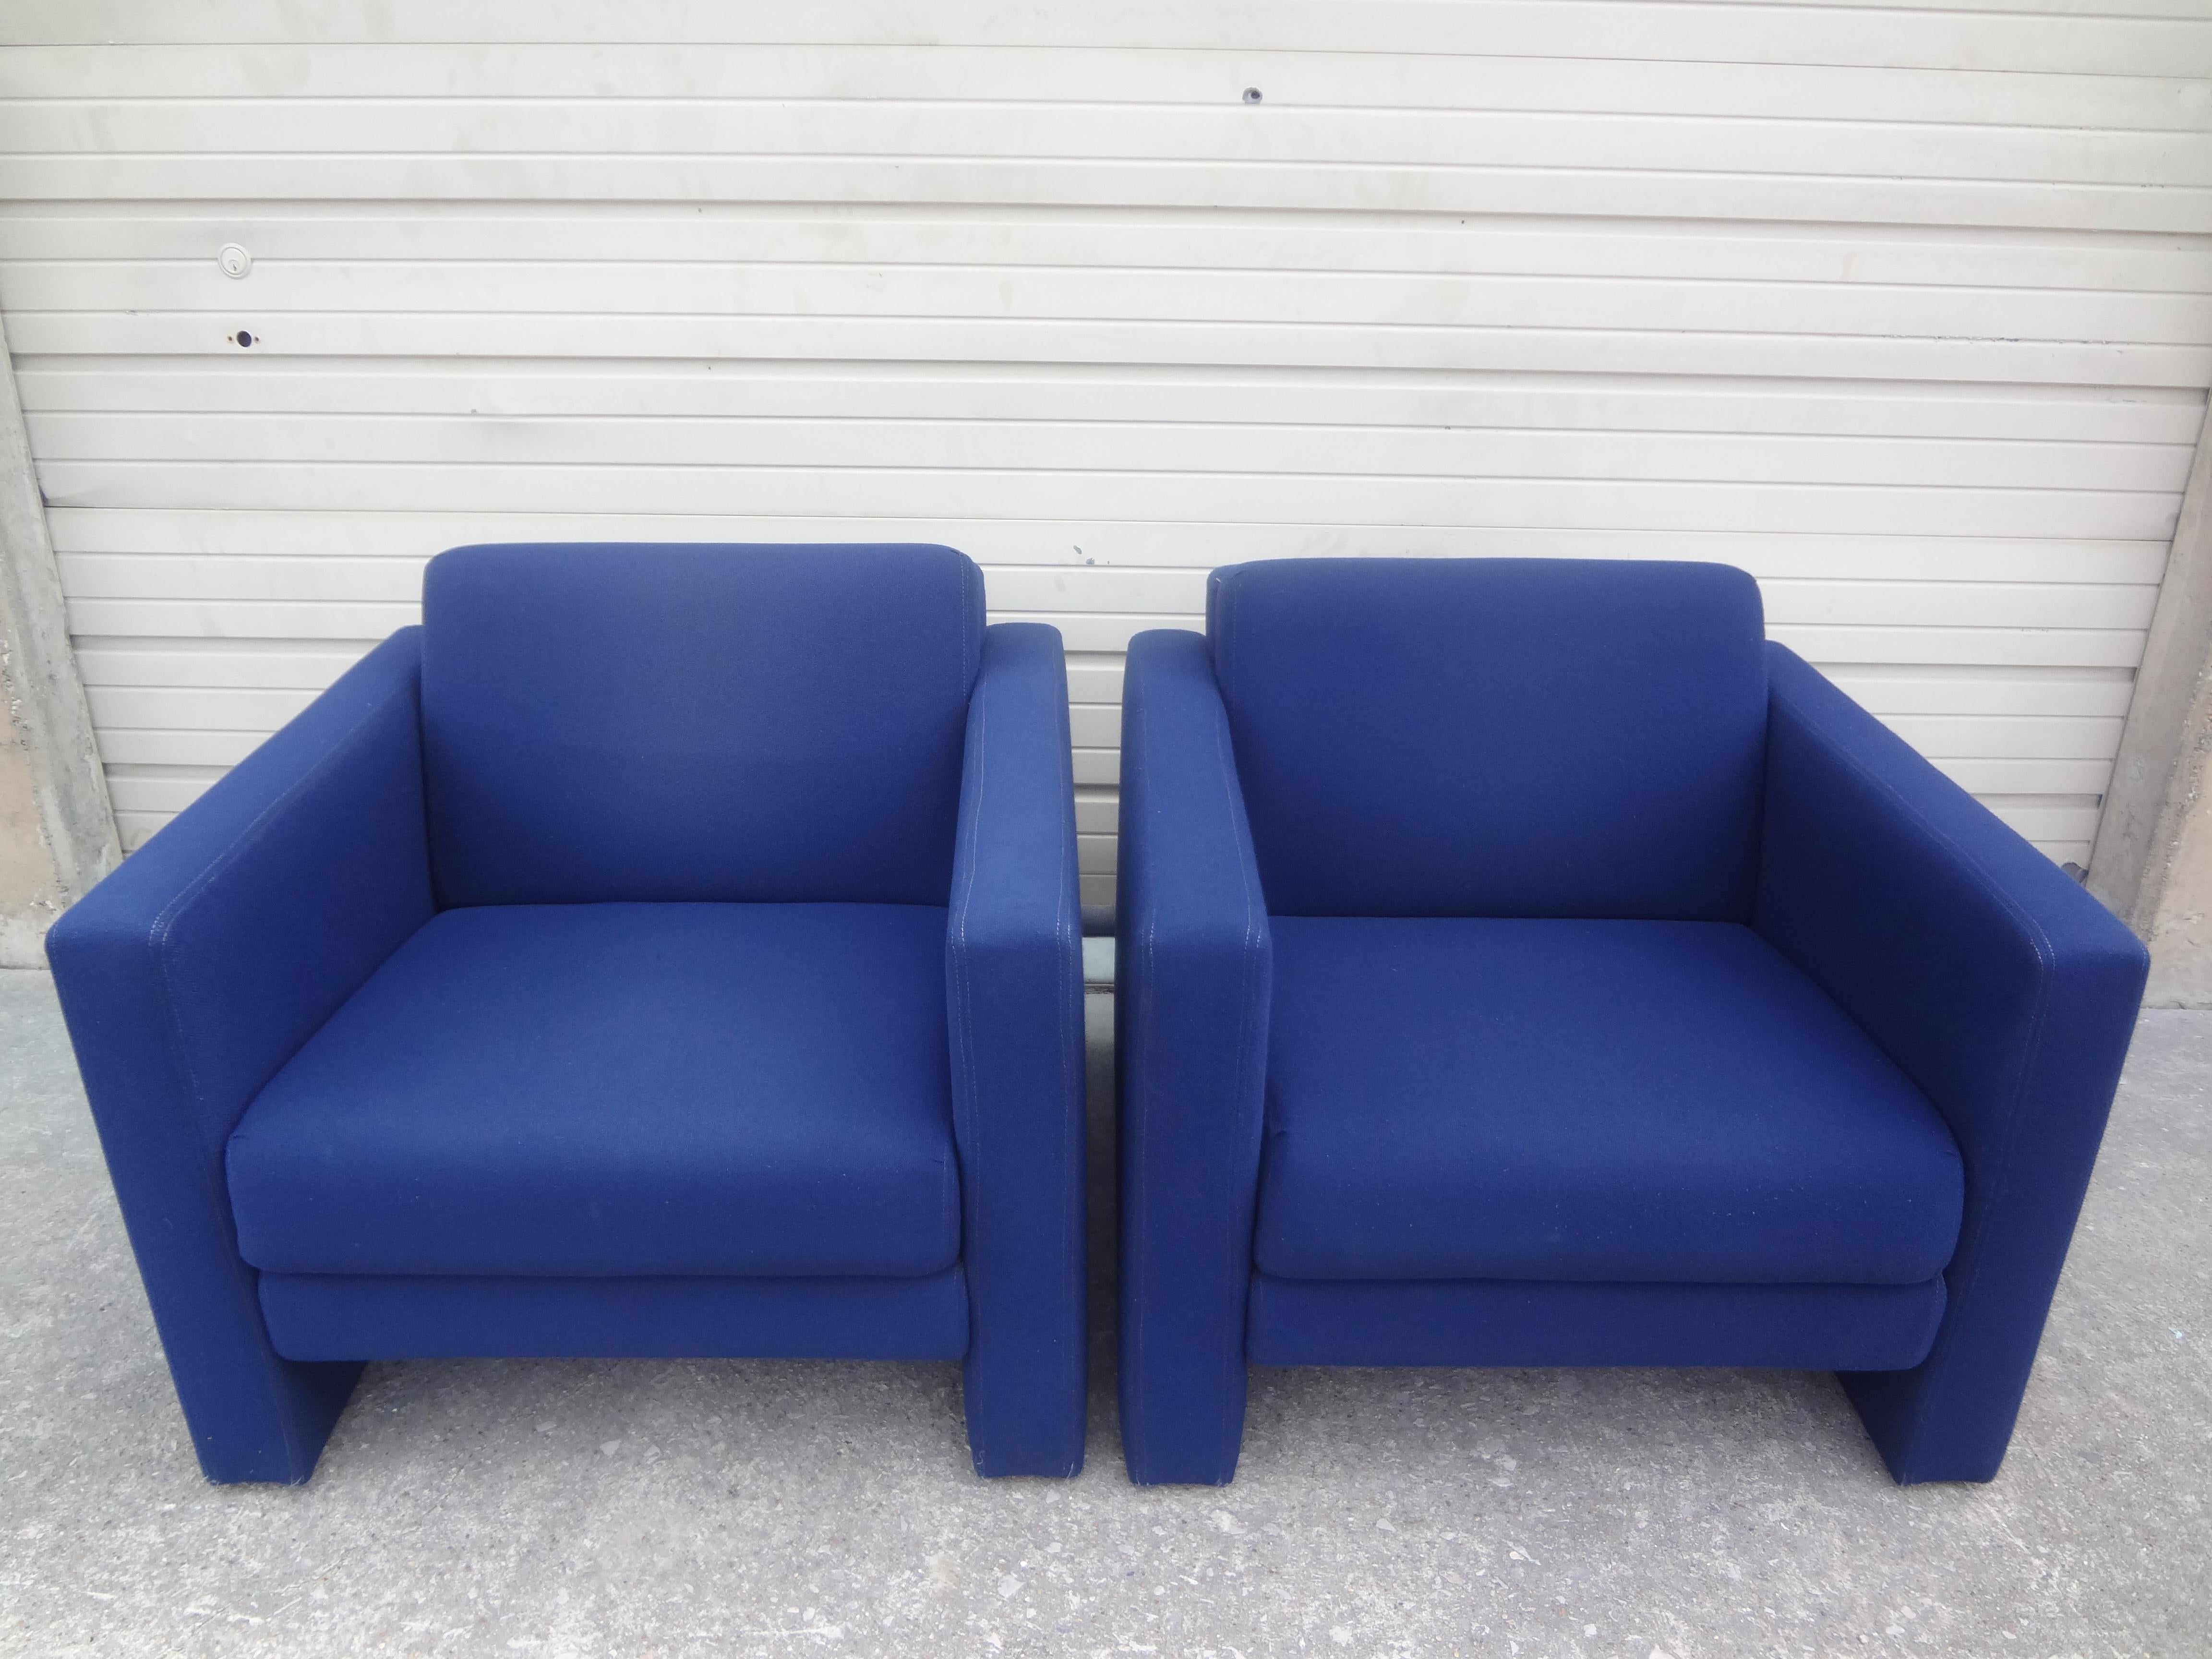 Pair of vintage Milo Baughman style club chairs or cube chairs. These handsome and comfortable chairs are stunning from every angle. They retain their original fabric which is used but in fairly good condition. Easy to reupholster if desired.